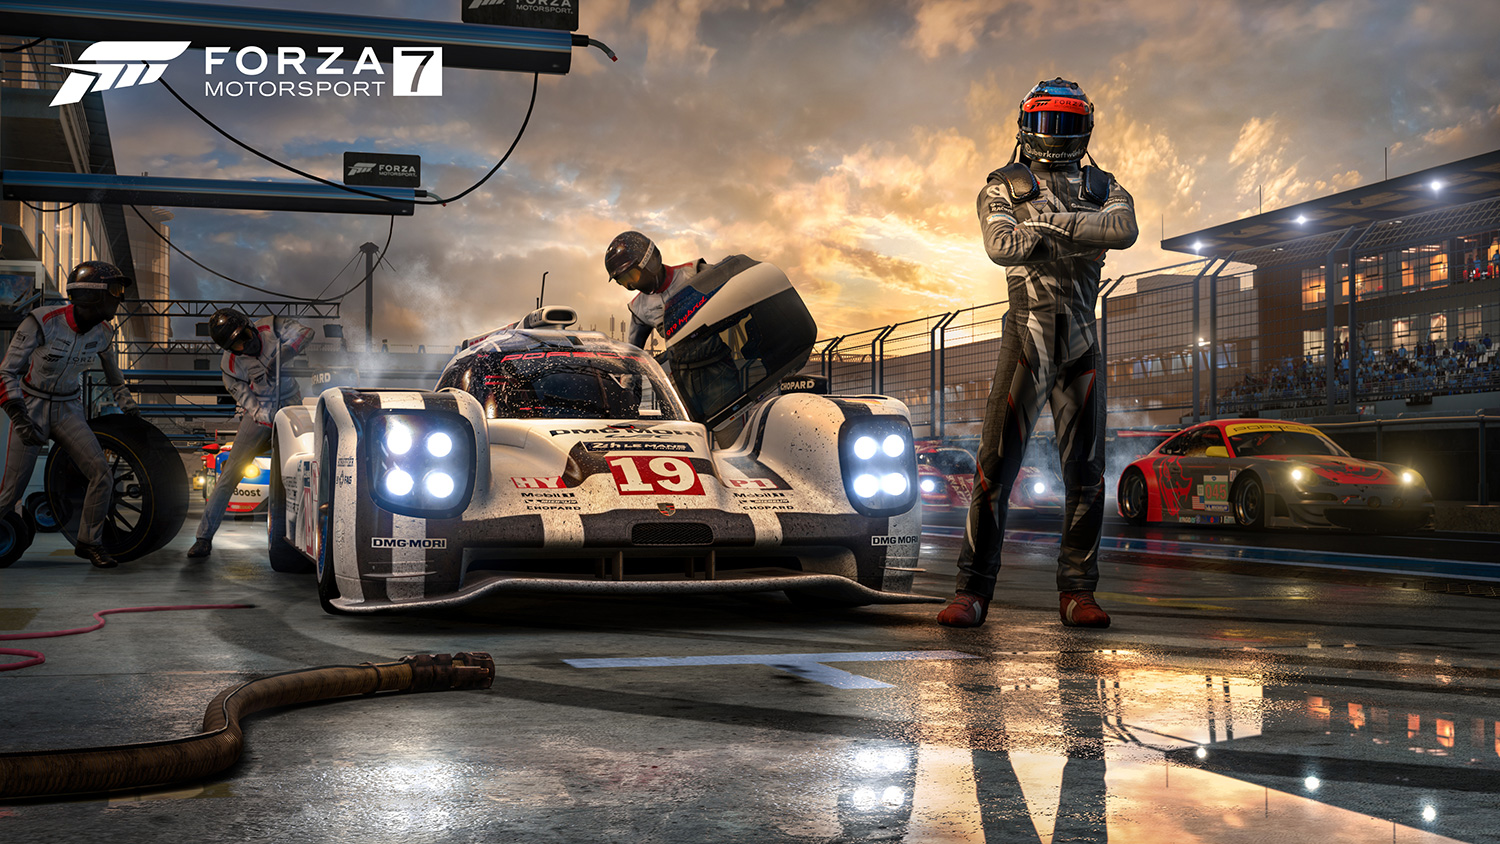 To what extent does Forza Motorsport on PC improve over consoles?